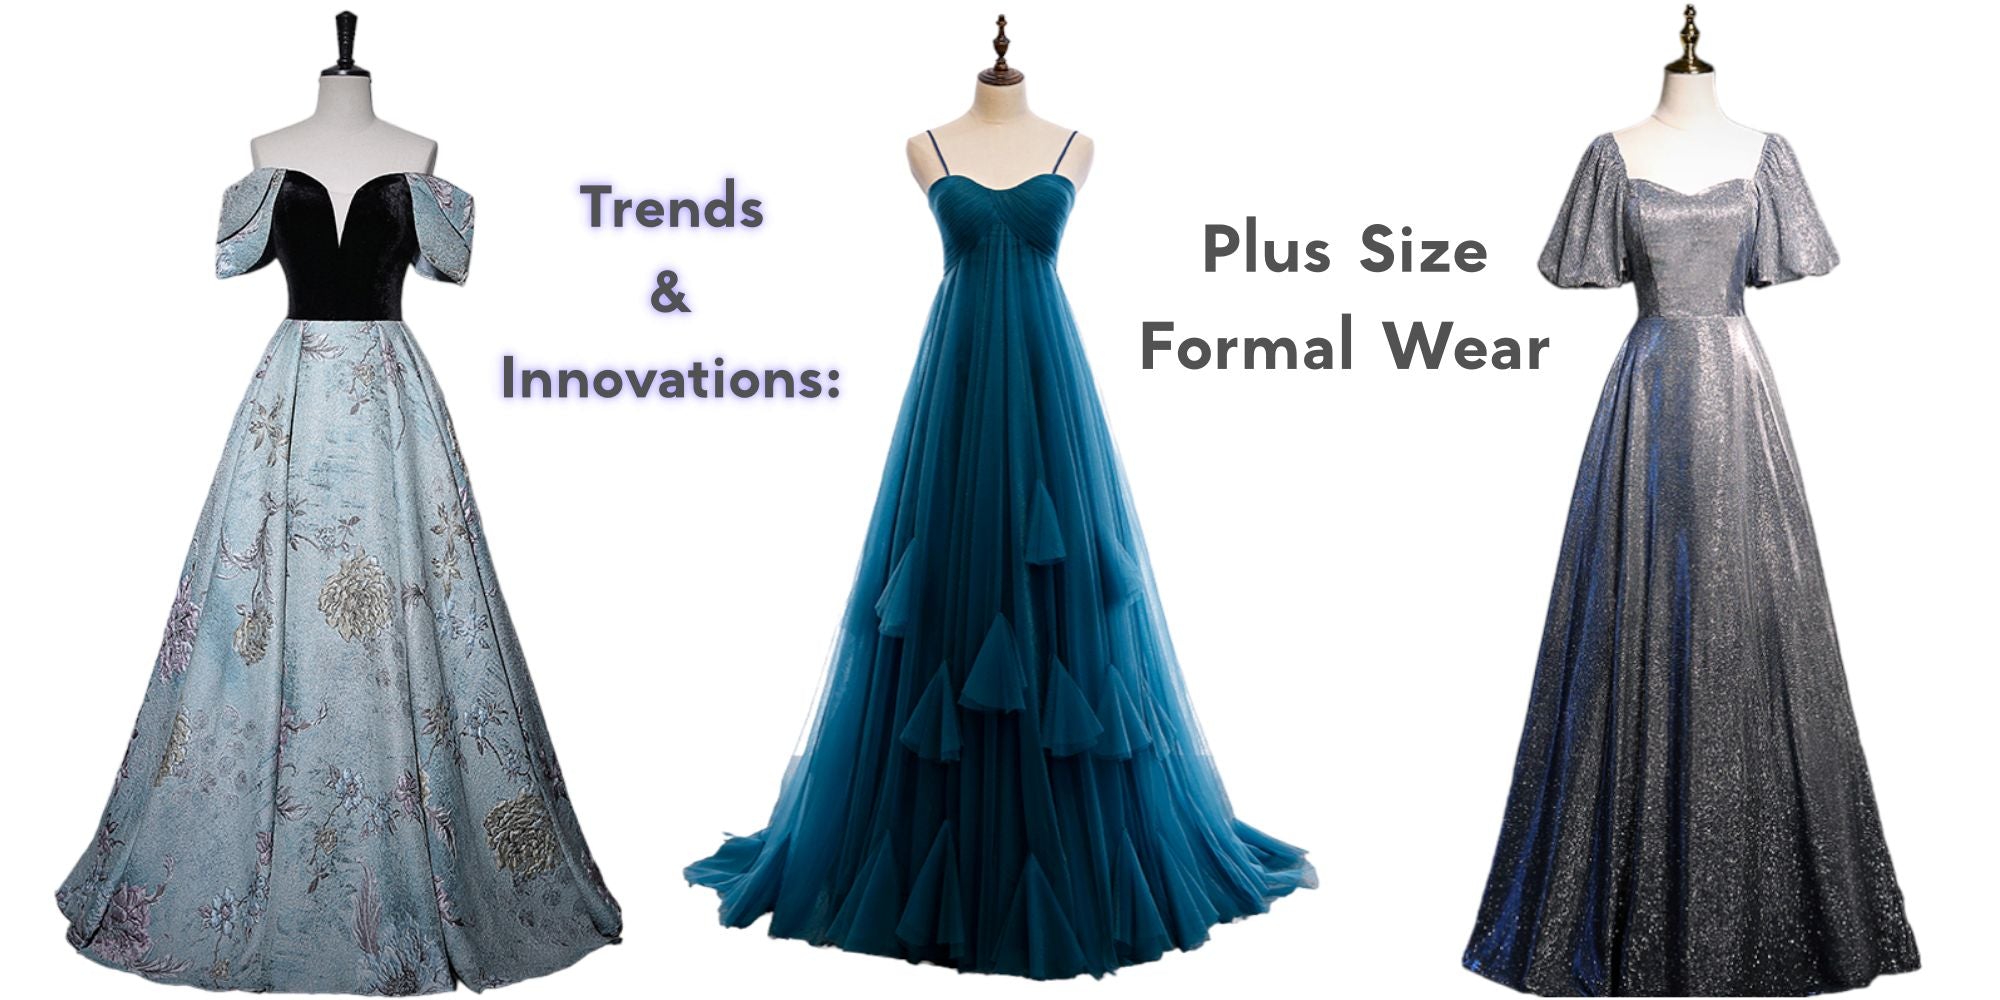 Trends and Innovations in Plus Size Formal Dresses